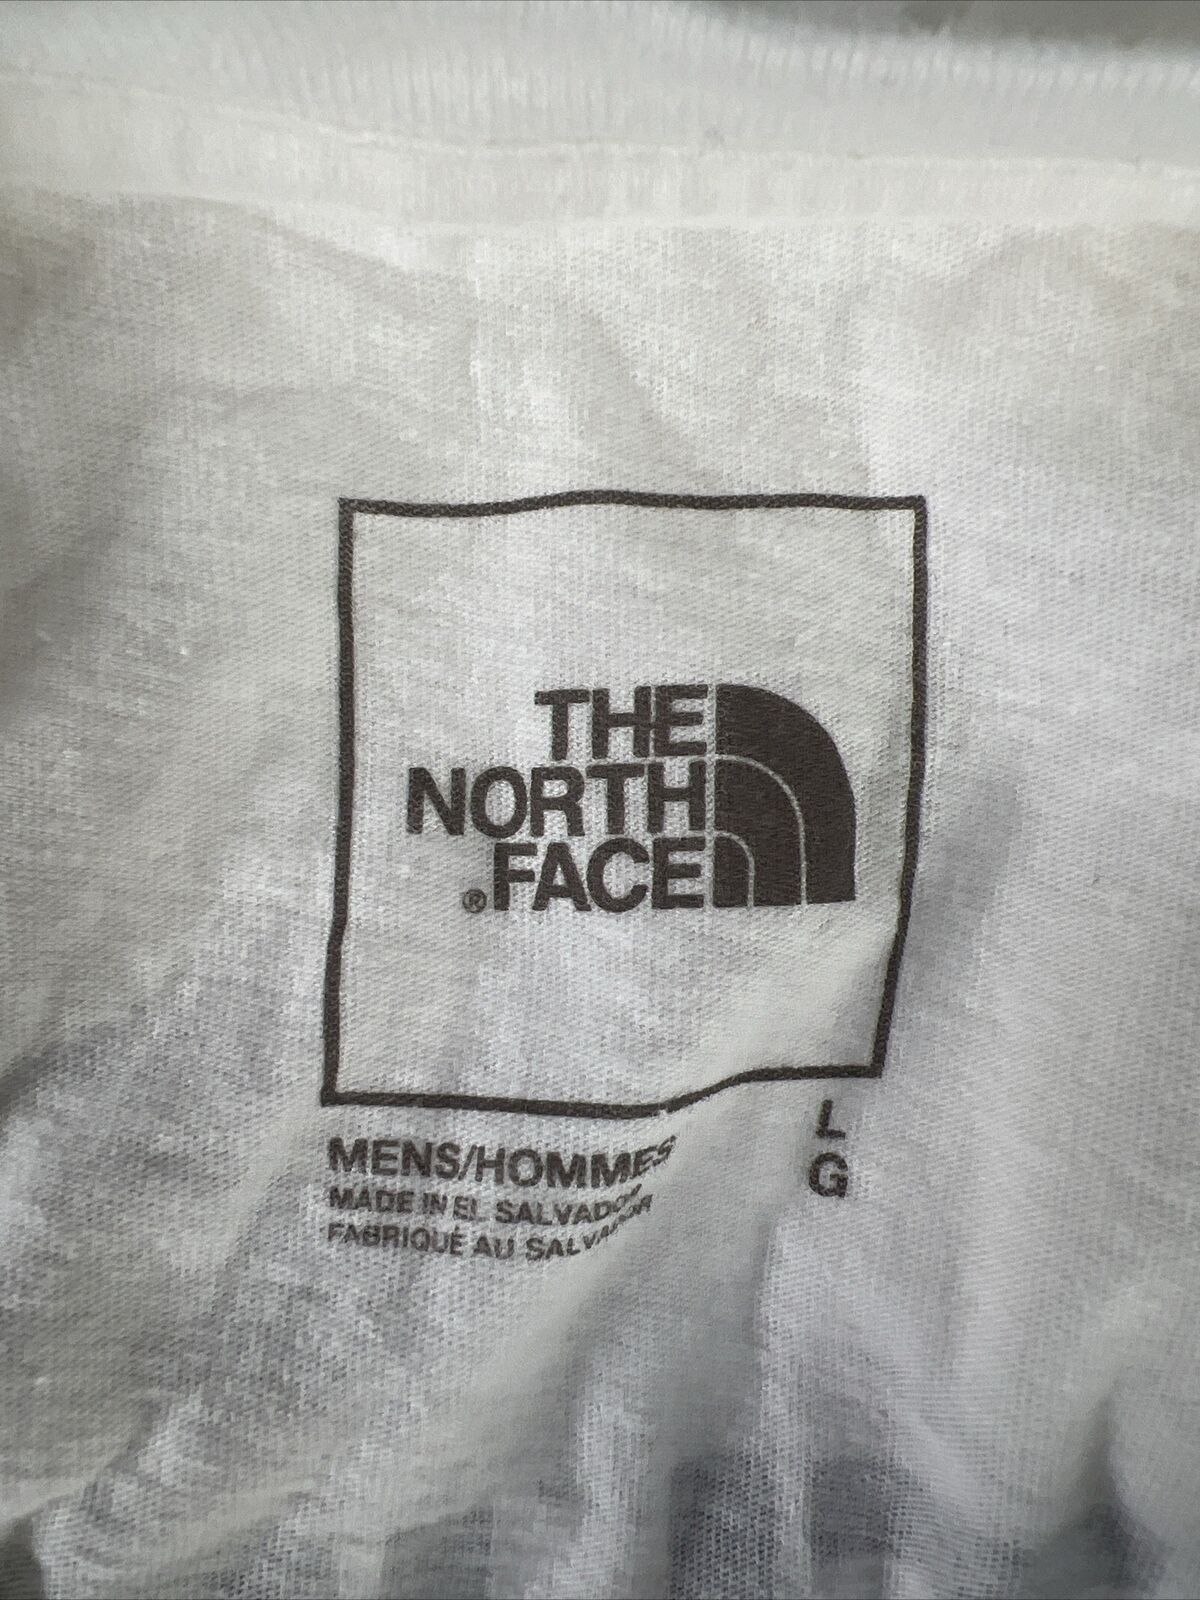 The North Face Men's White Graphic Back Long Sleeve T-Shirt - L